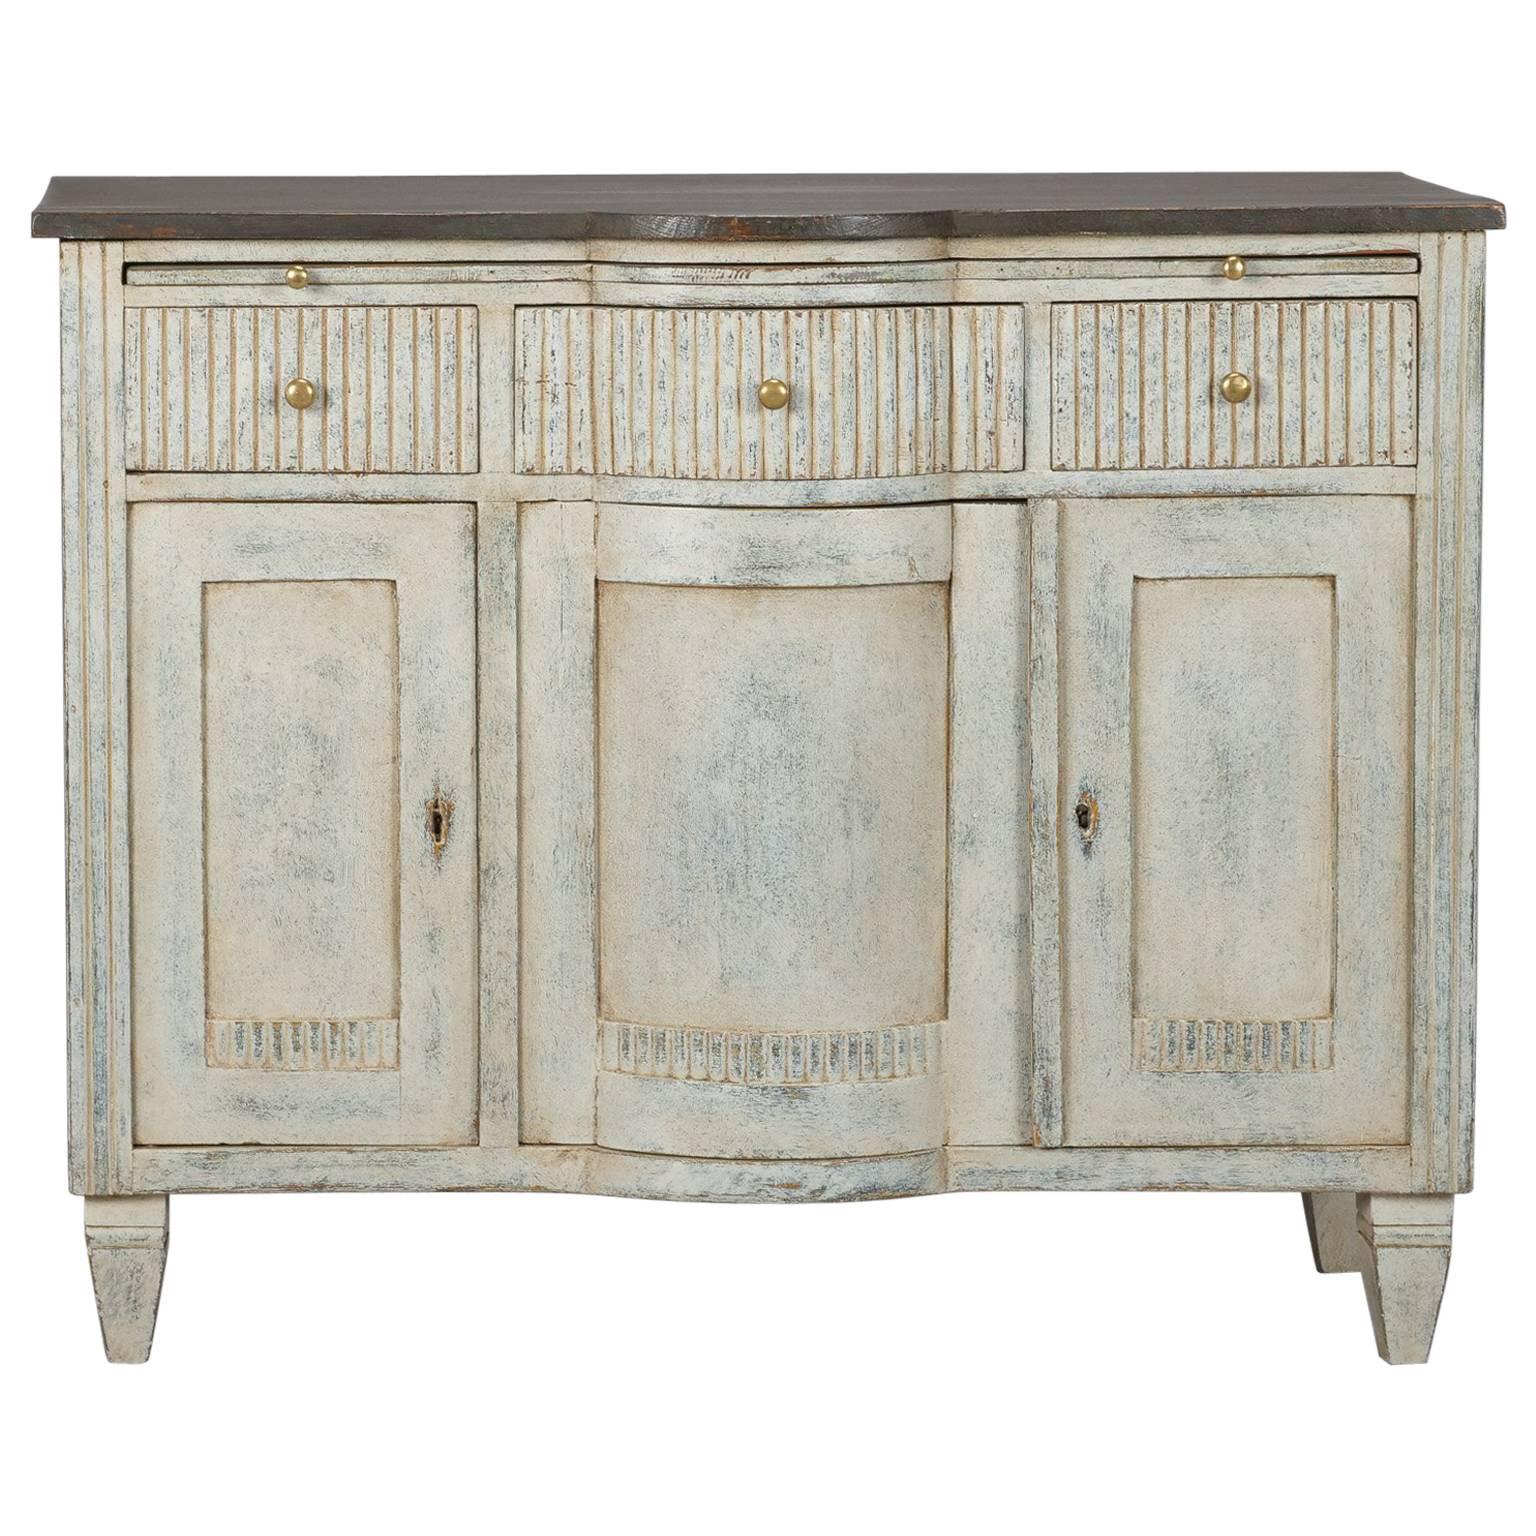 19th Century Painted Serpentine Buffet Cabinet